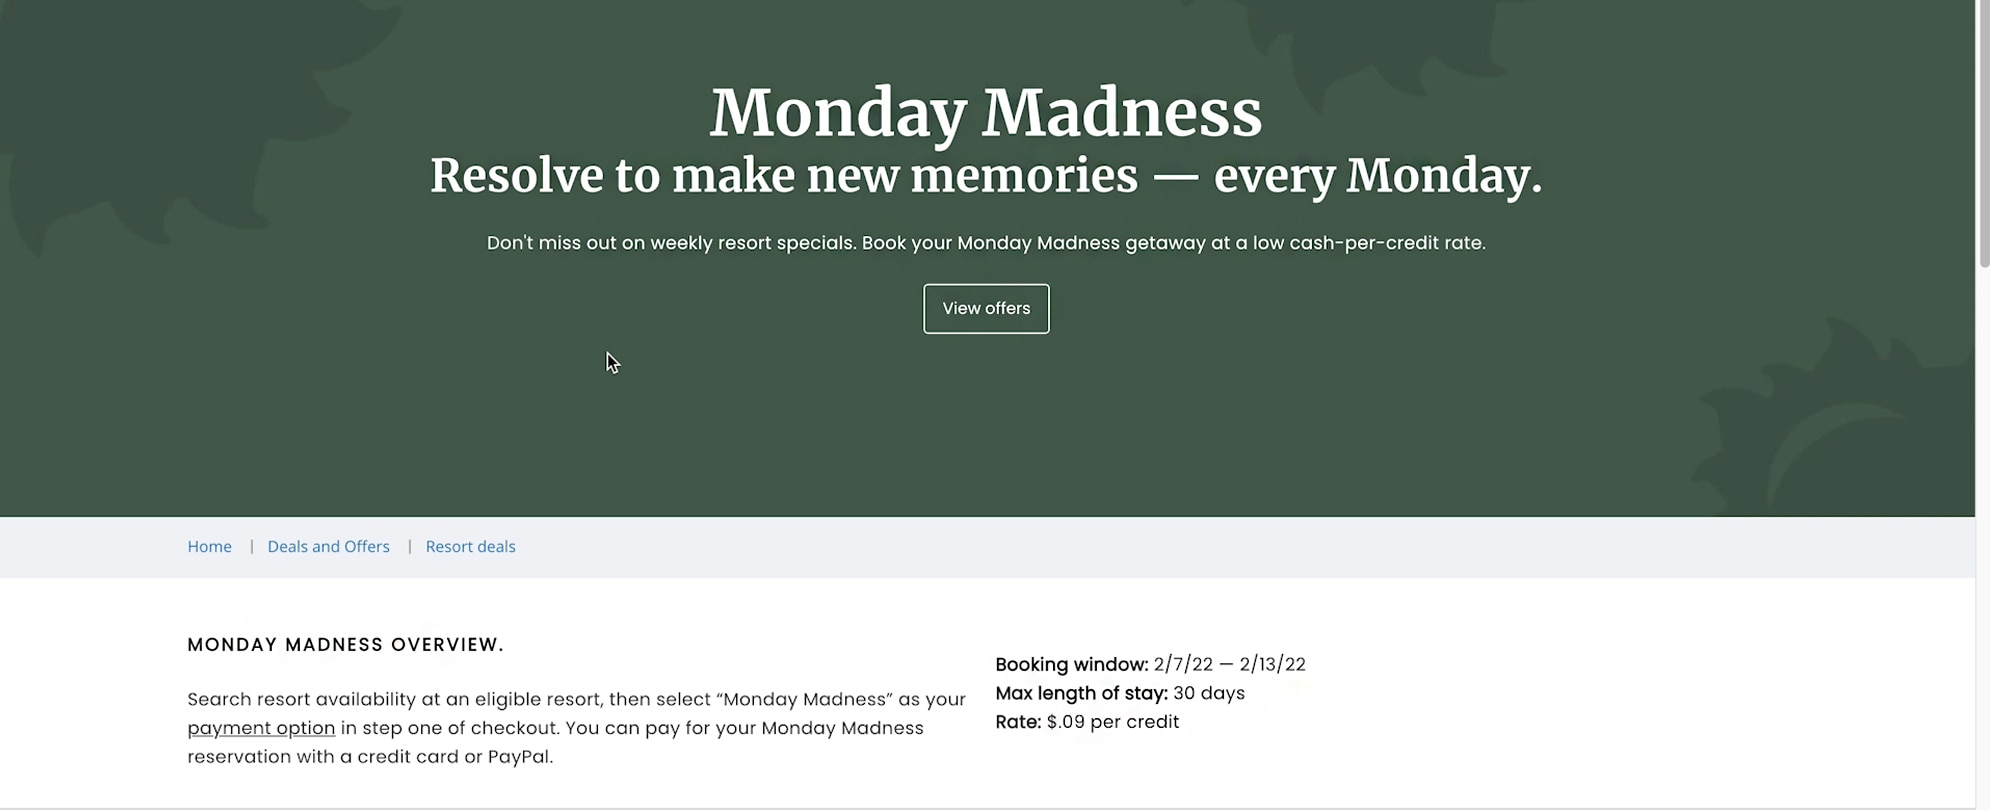 A screenshot of the monday madness webpage showing weekly resort specials for a low cash-per-credit rate.